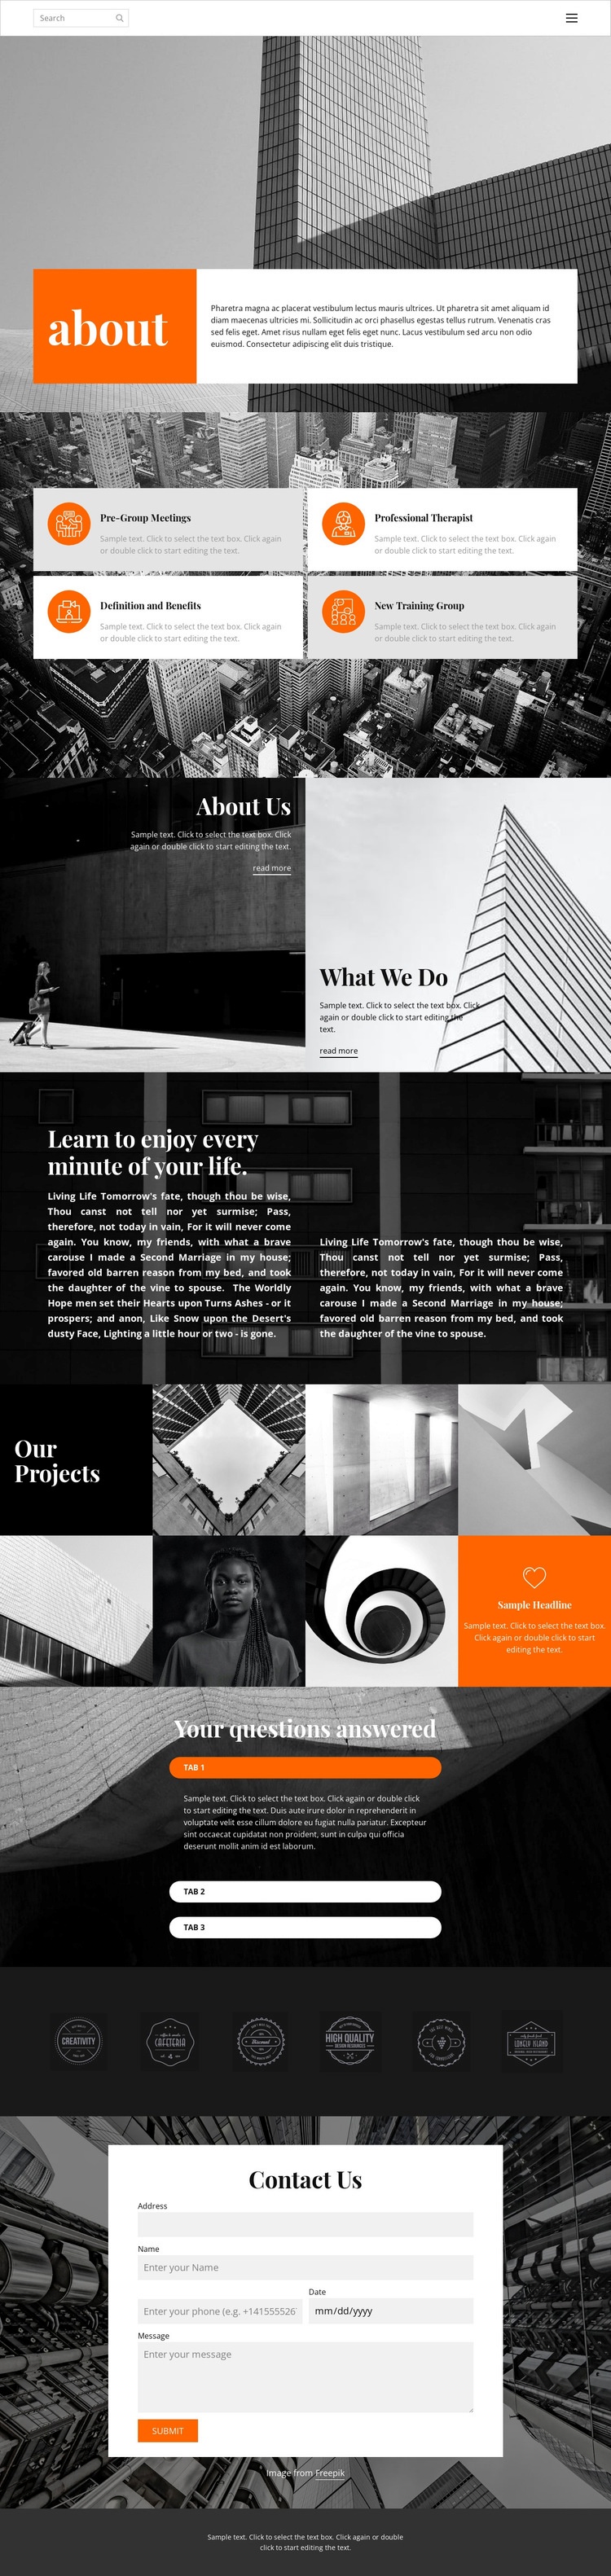 New projects studio Homepage Design